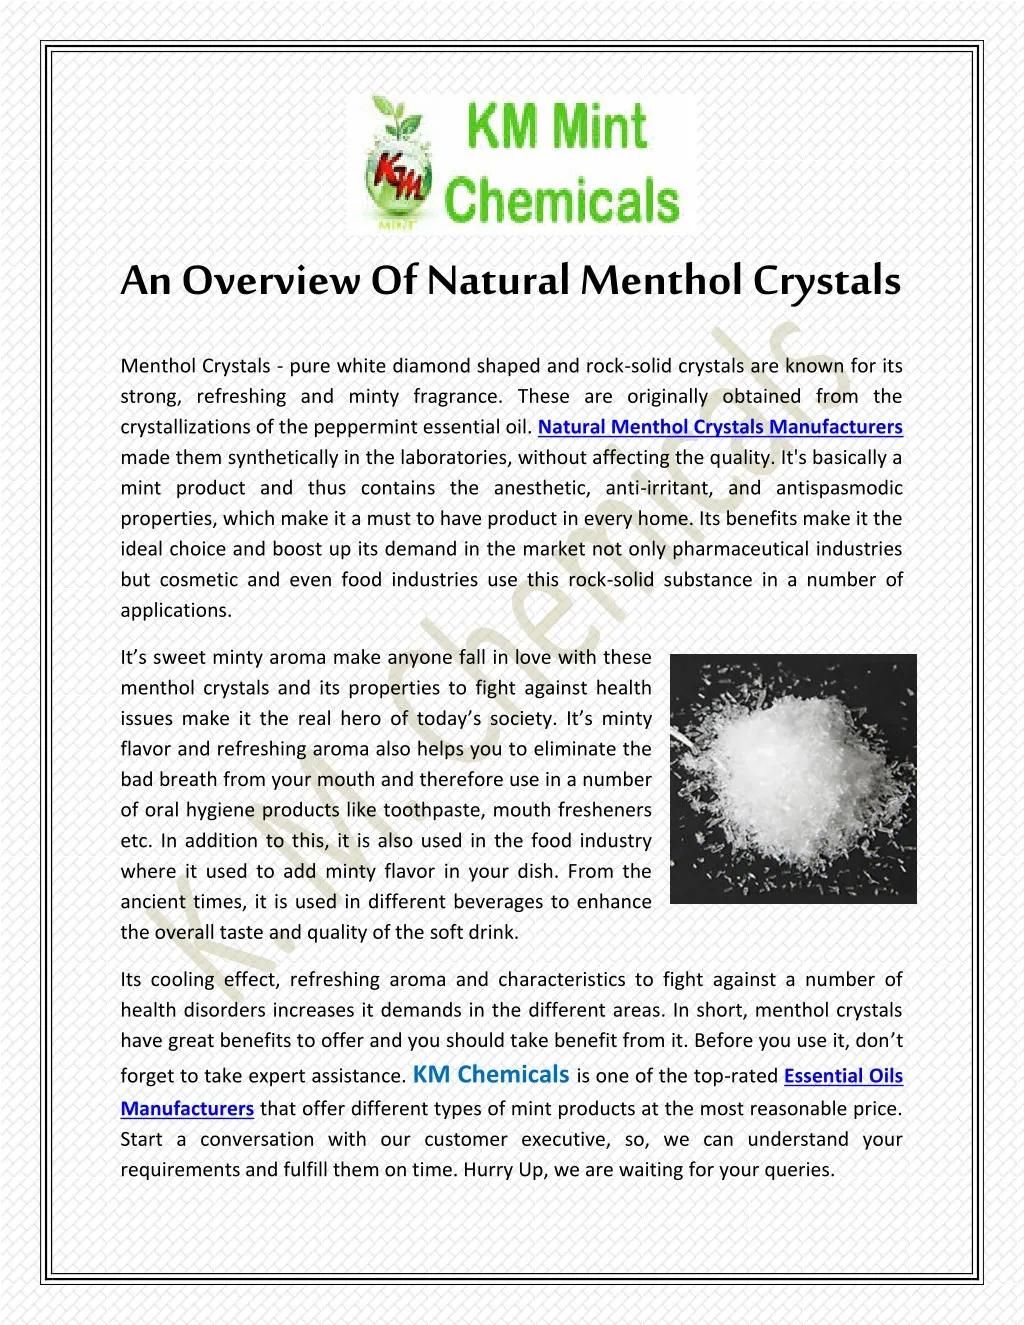 an overview of natural menthol crystals